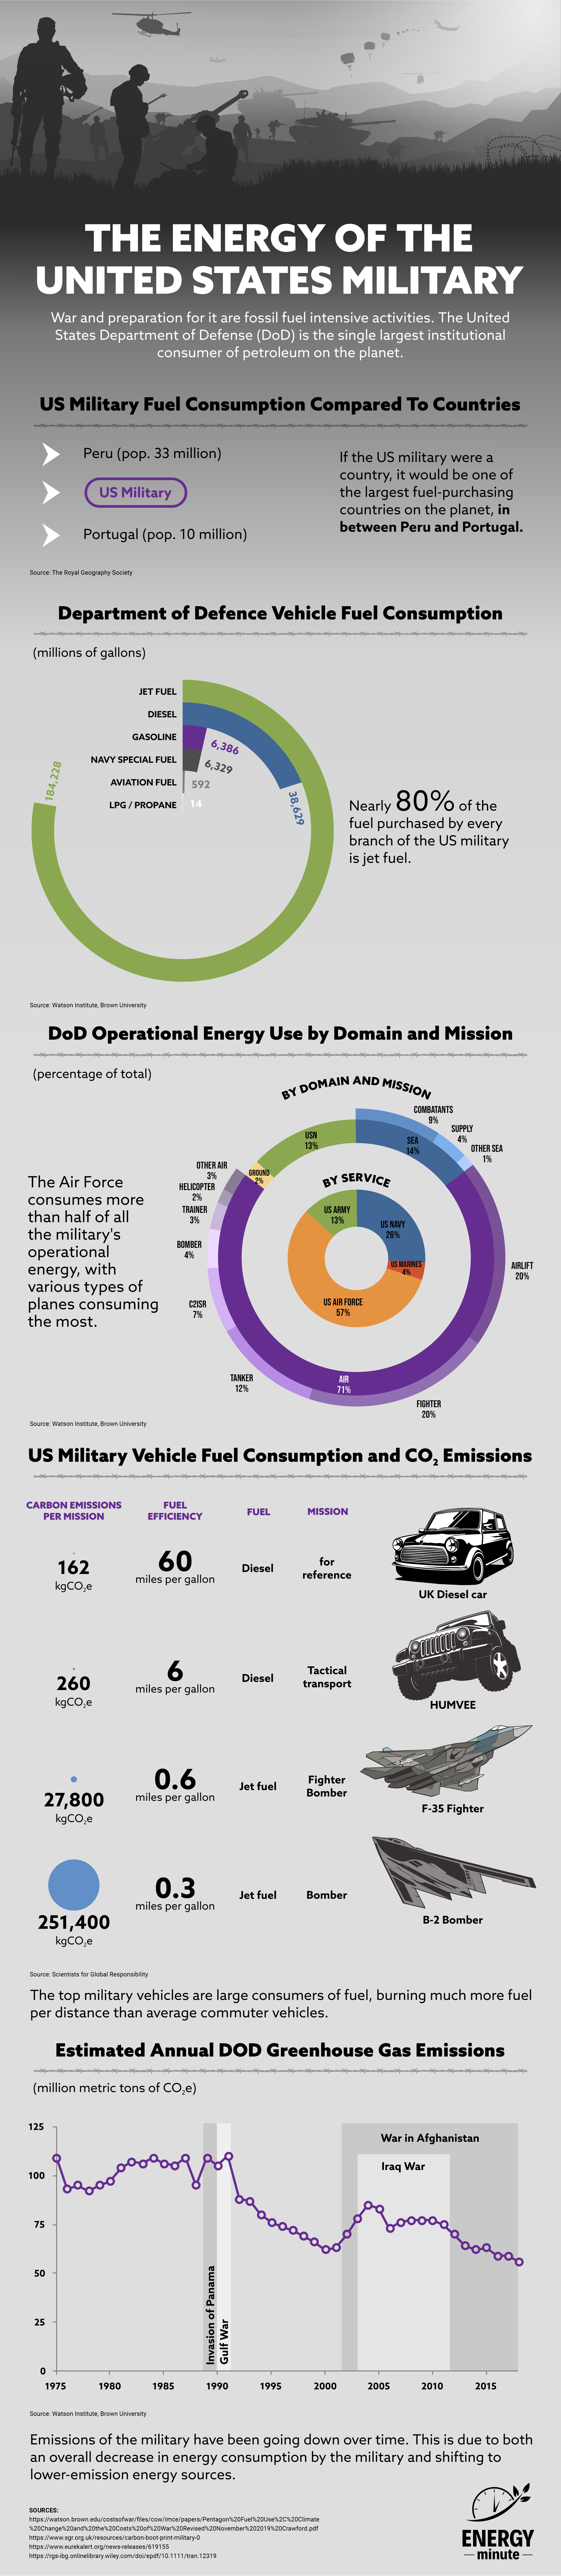 Energy consumption of the US military